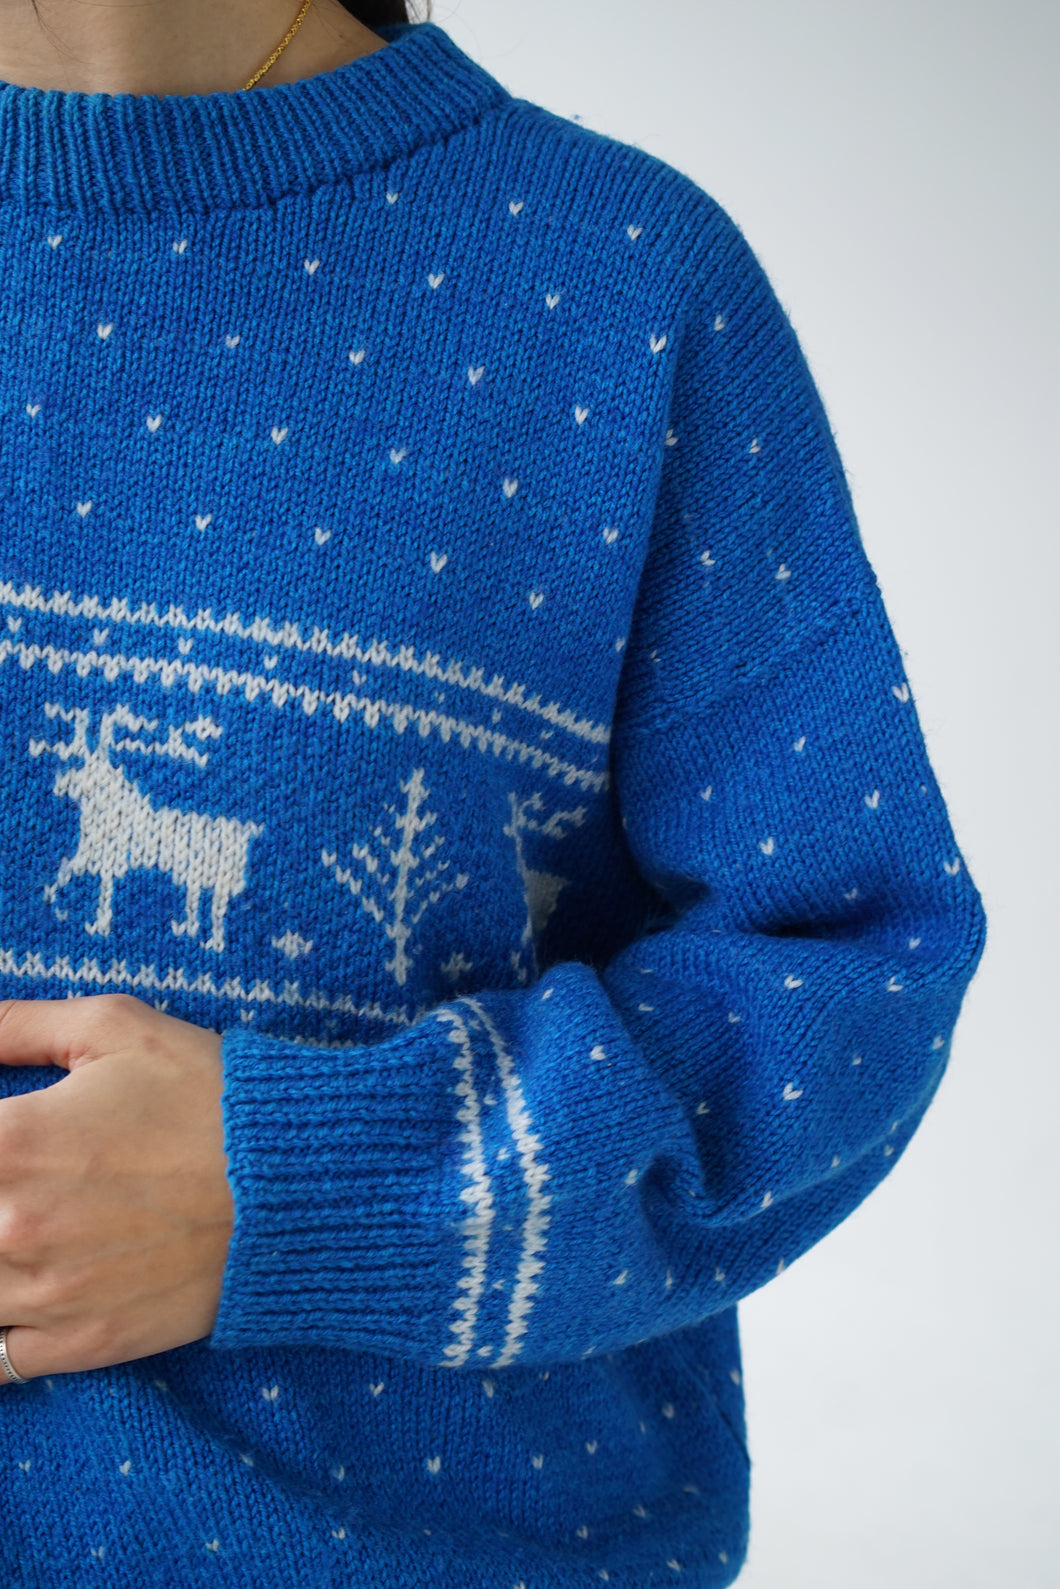 Festive sweater with winter patterns